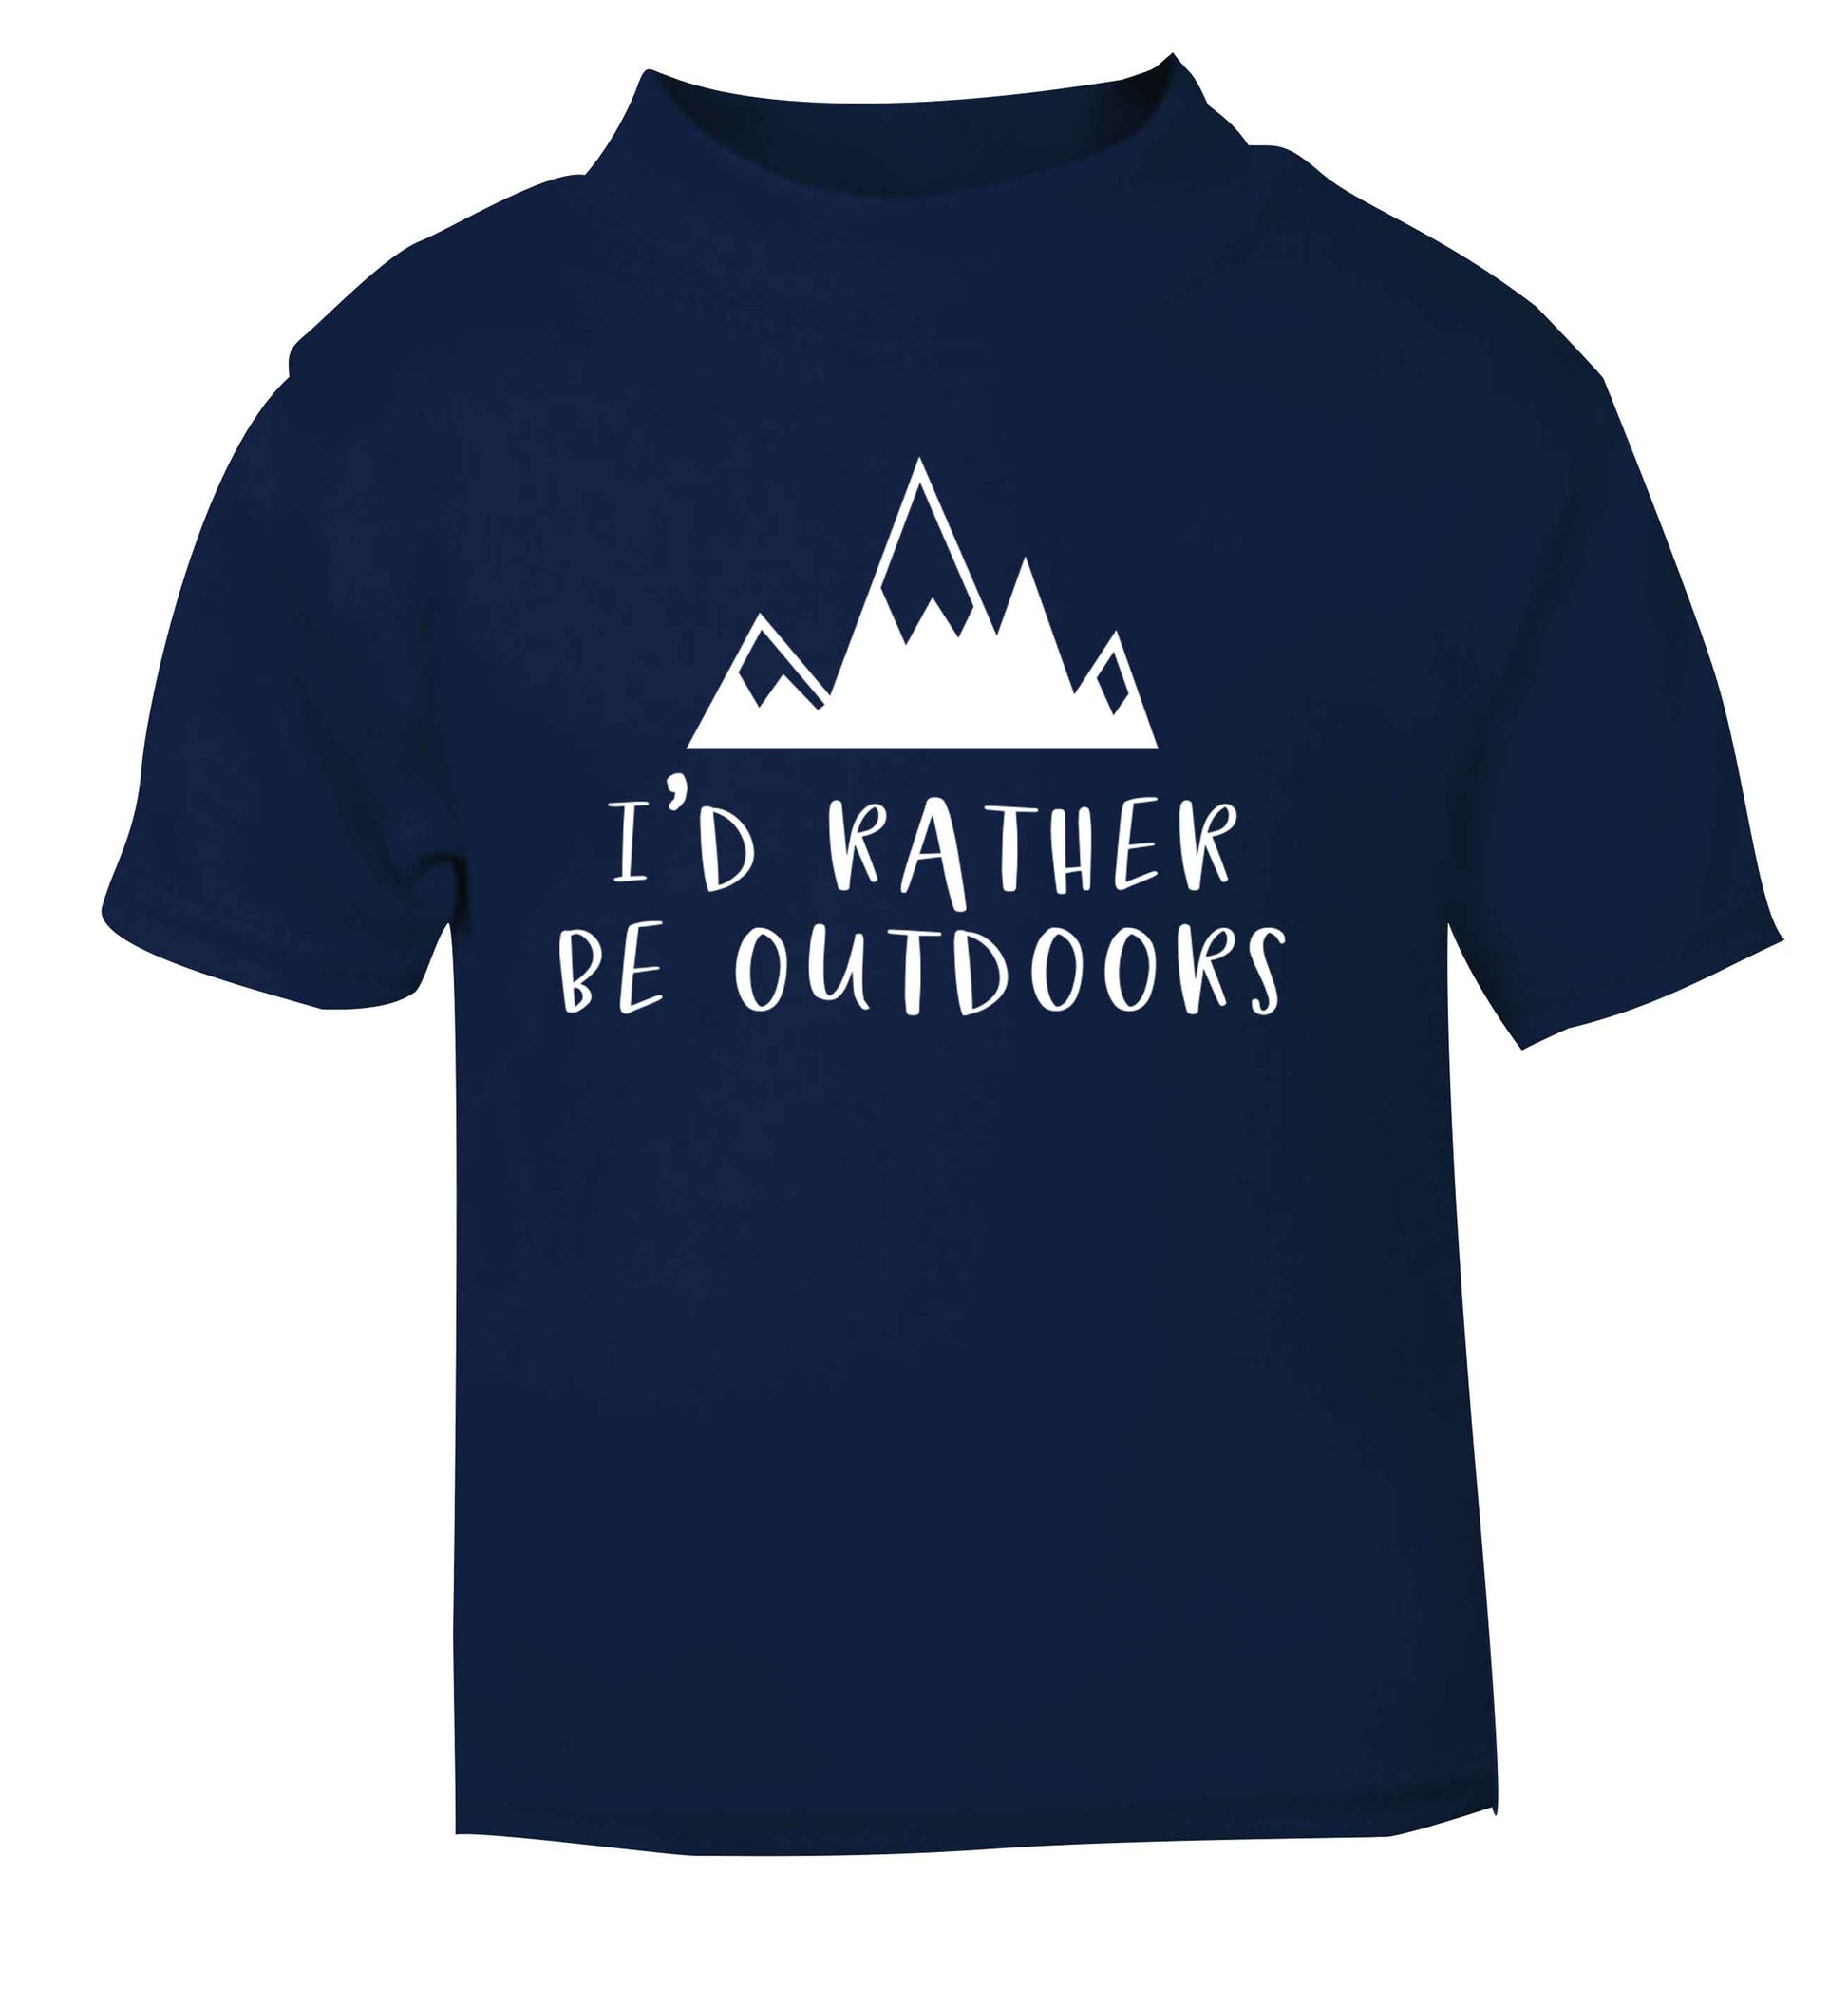 I'd rather be outdoors navy Baby Toddler Tshirt 2 Years